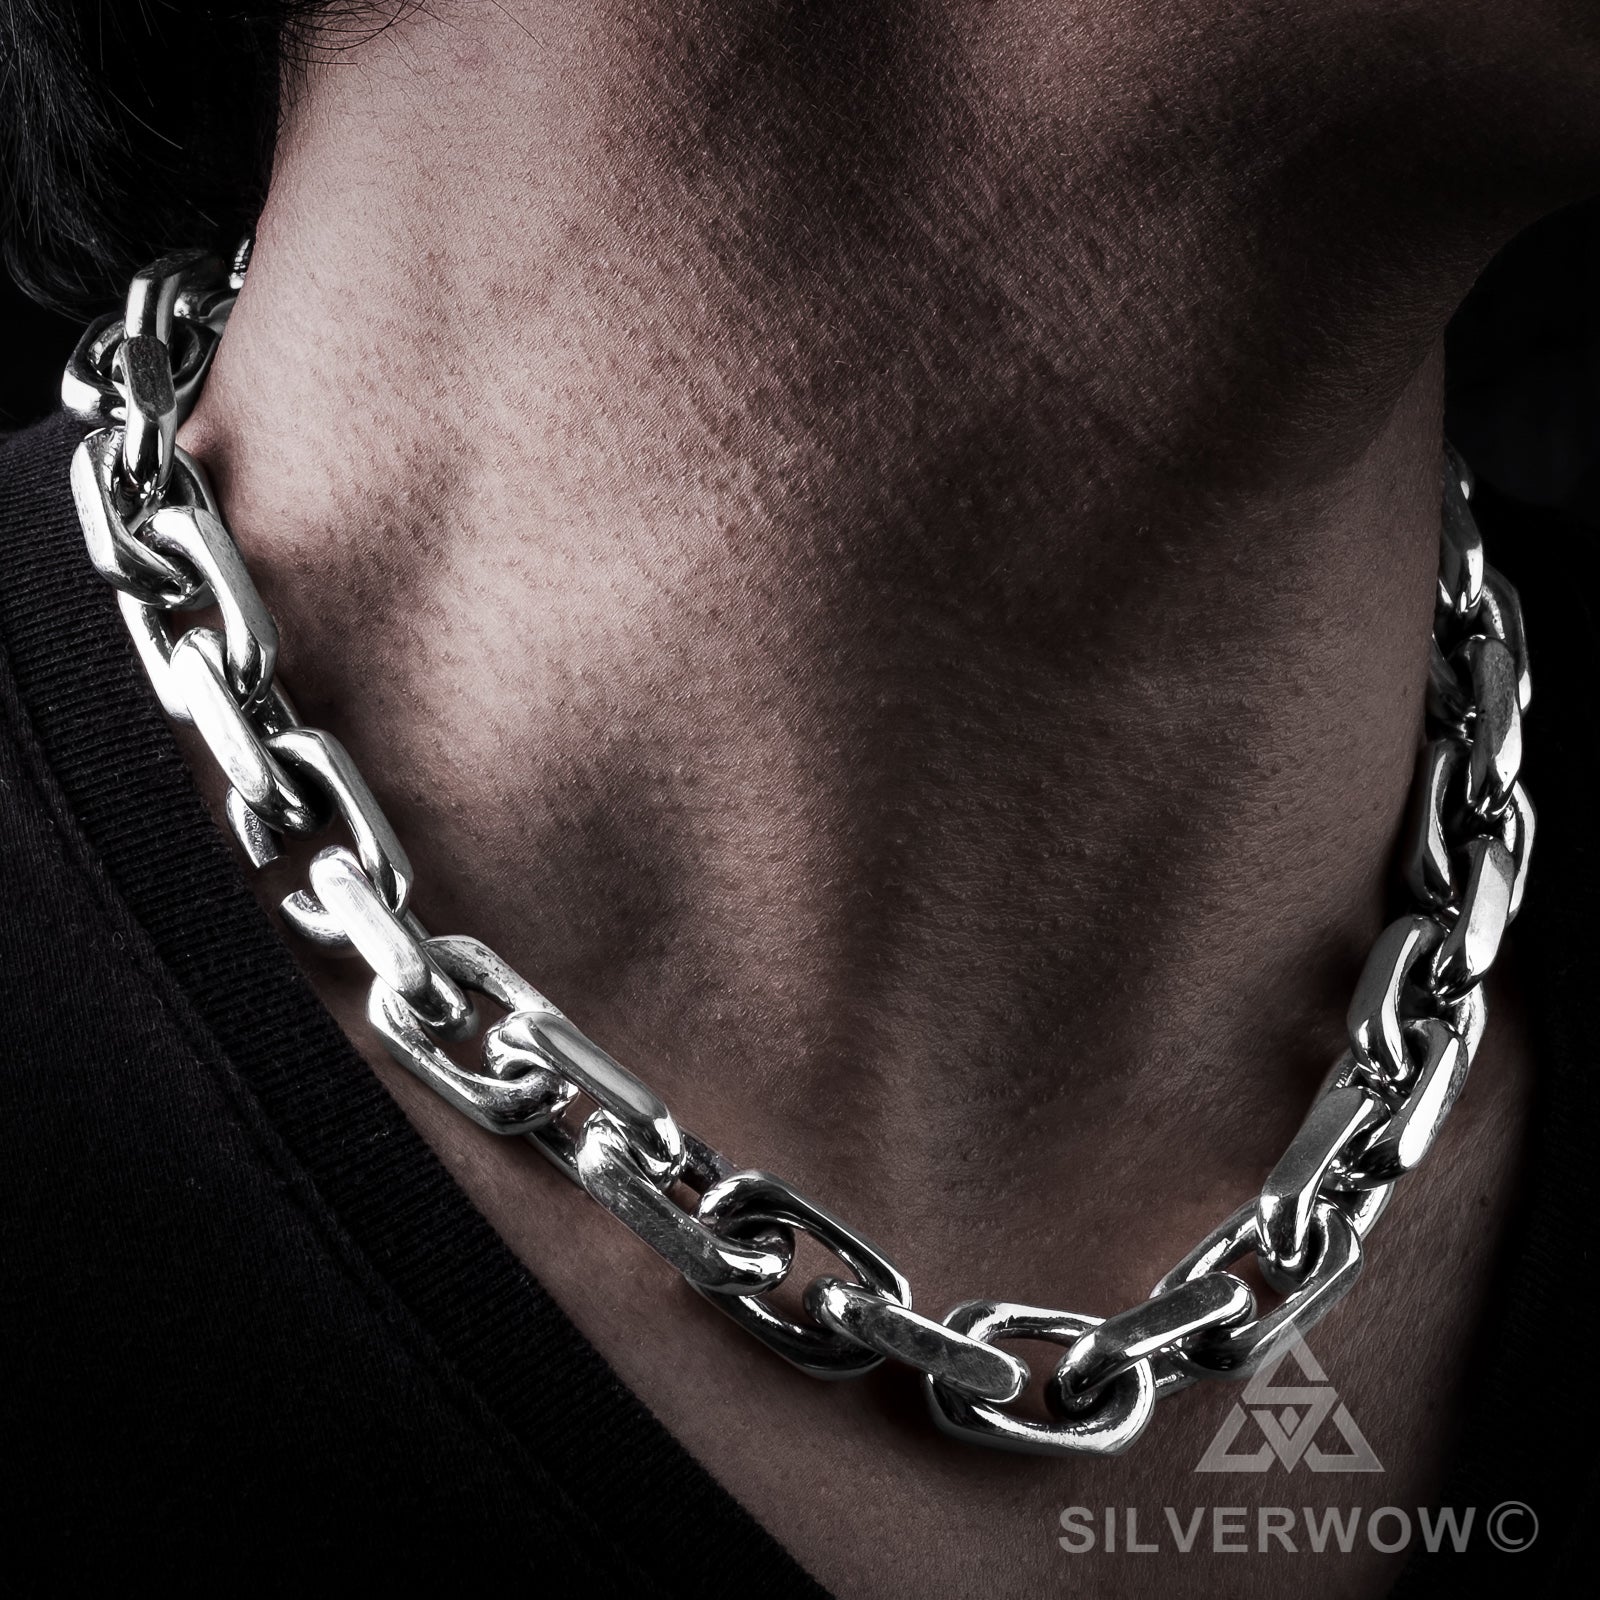 15mm Chain Link Necklace - Heavier Version